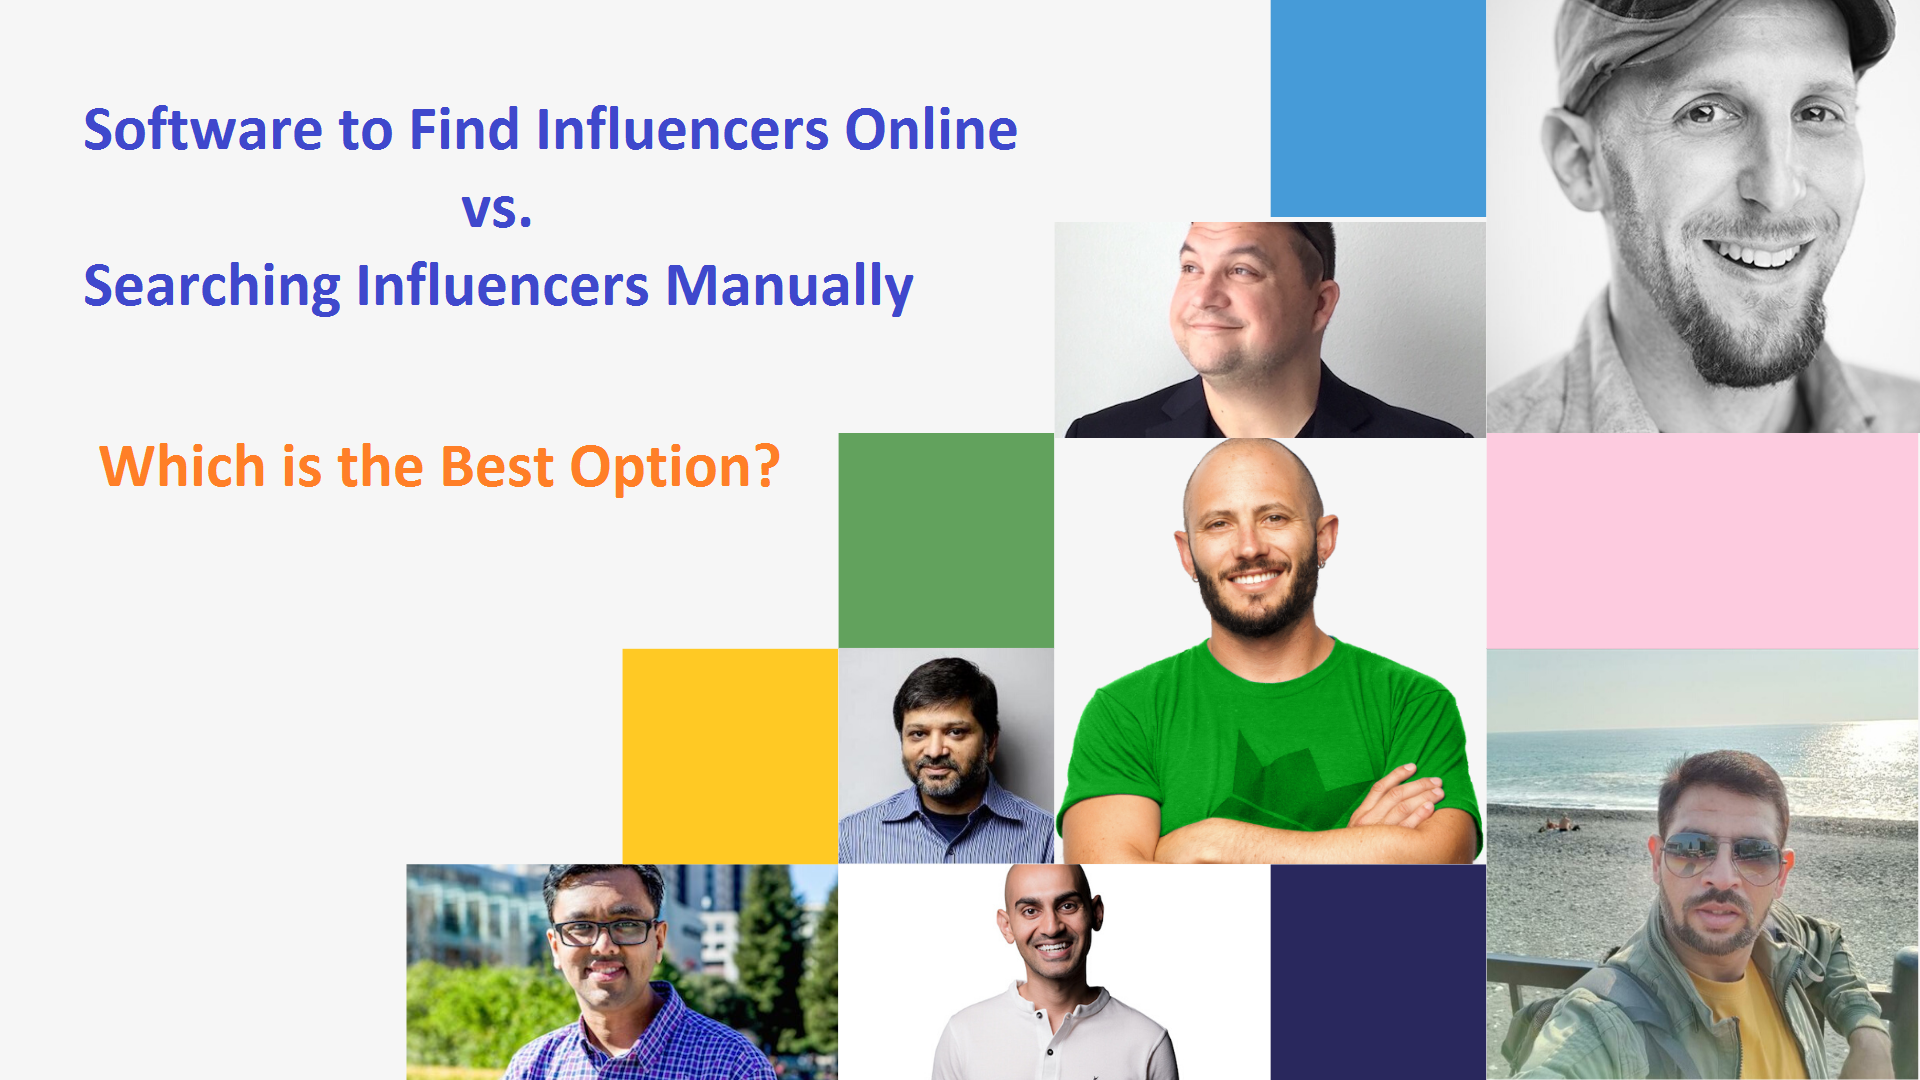 Software to Find Influencers Online vs. Searching for Influencers Manually: Which is Better?